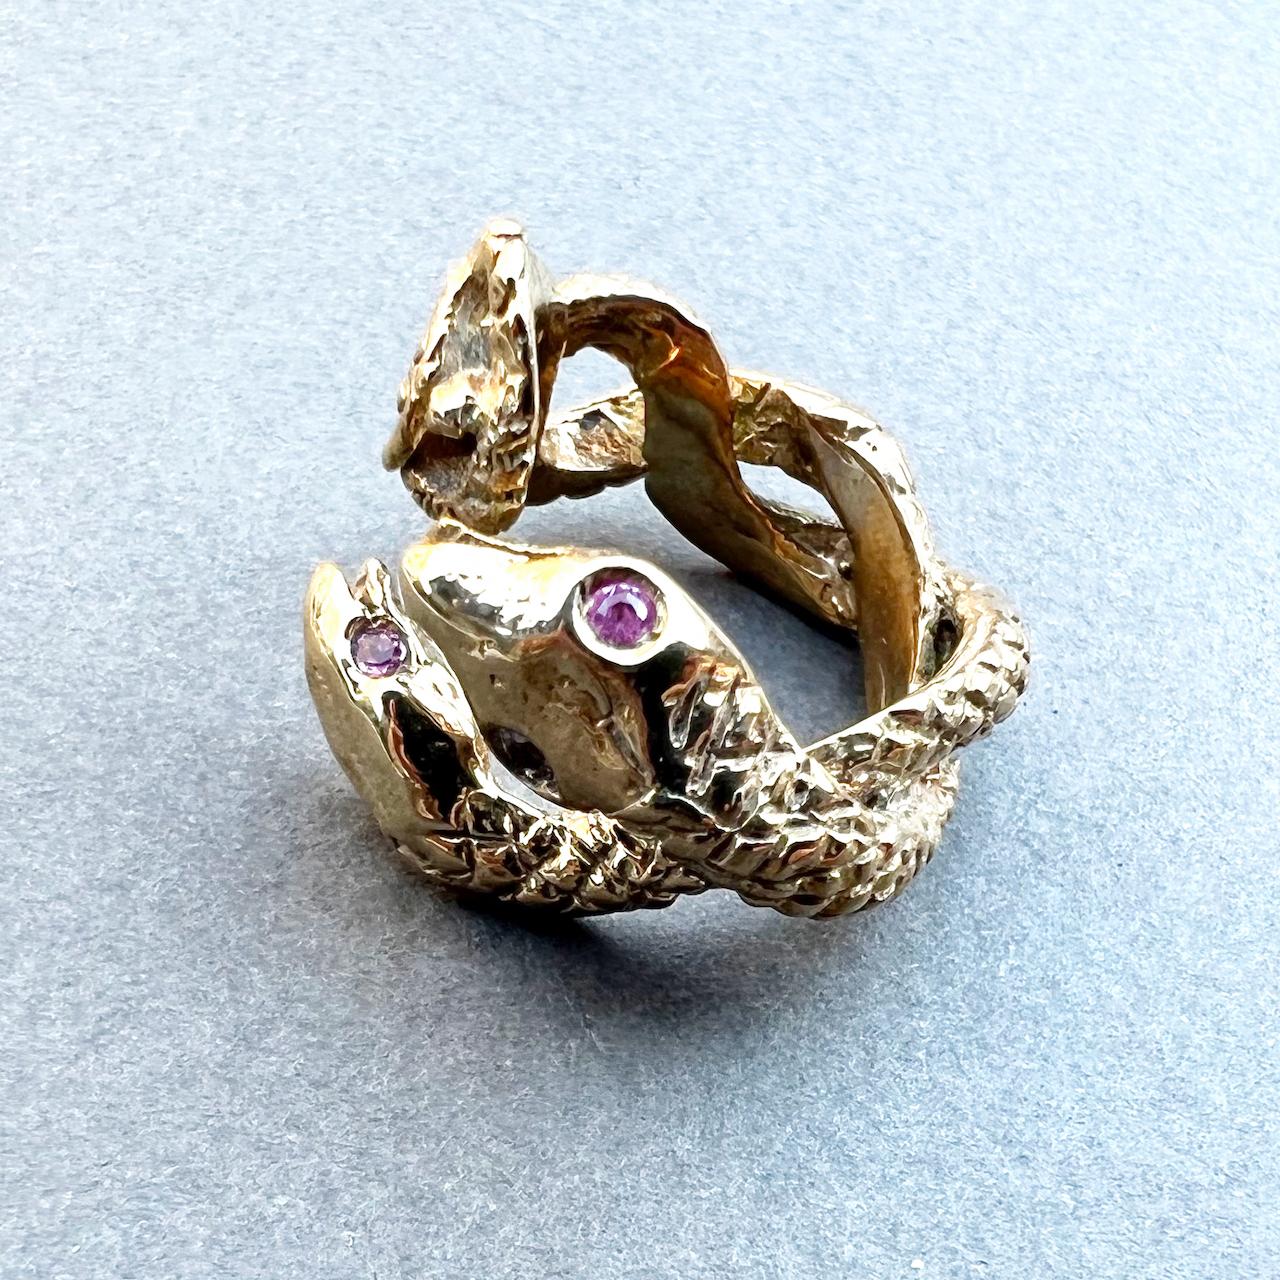 Animal Jewelry Pink Sapphire Snake Ring Bronze Cocktail Ring J Dauphin For Sale 2